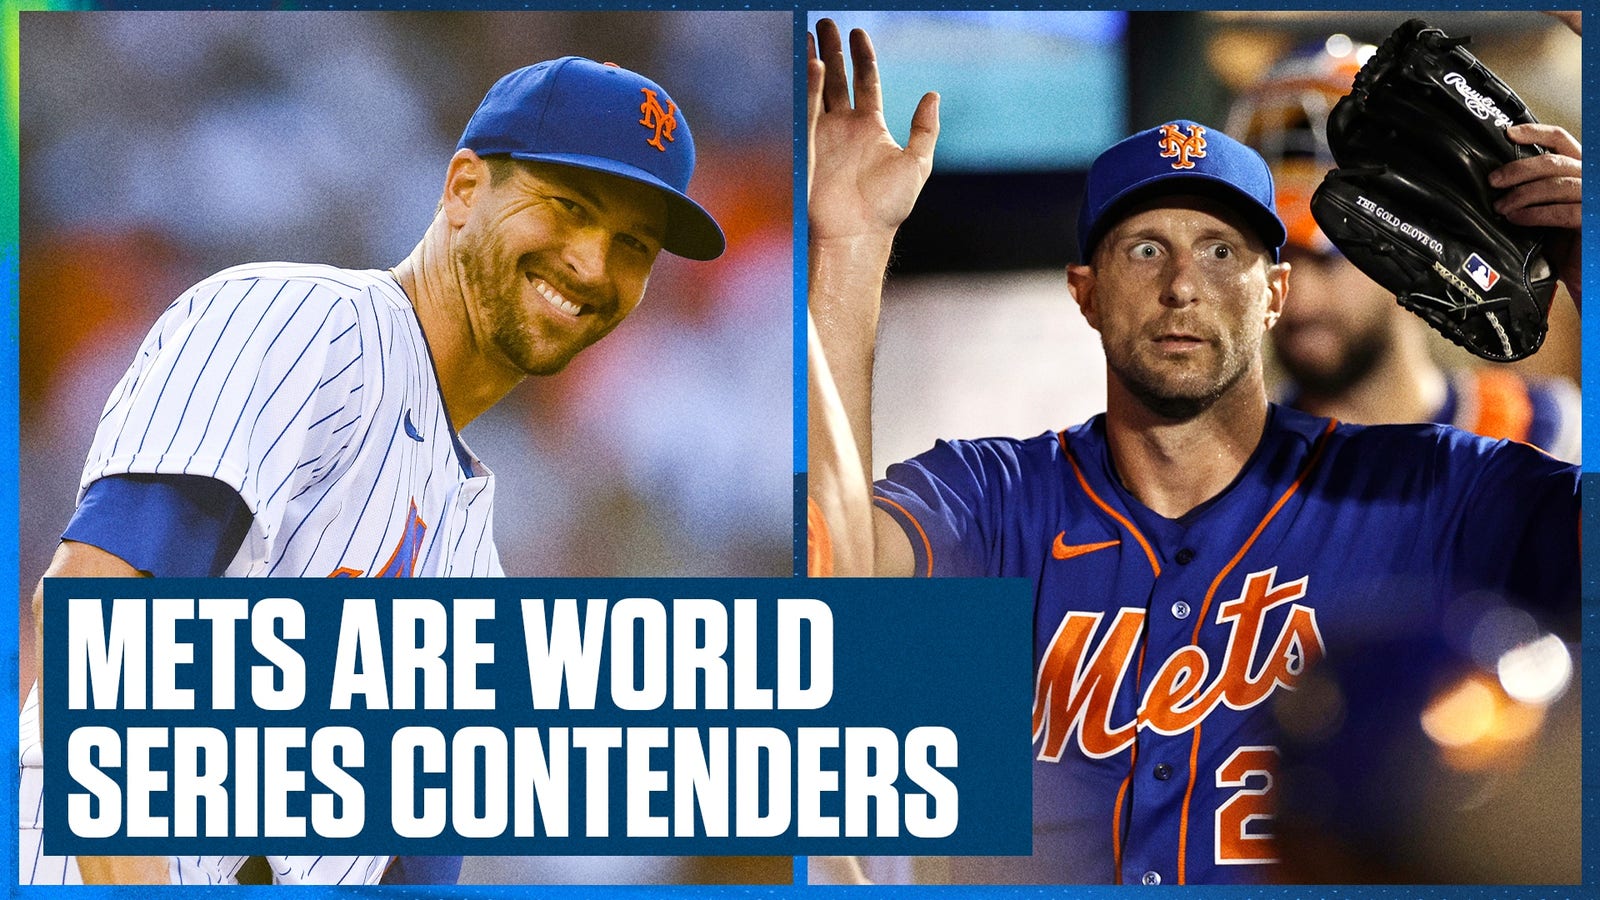 Mets are World Series contenders with deGrom, Scherzer and Diaz